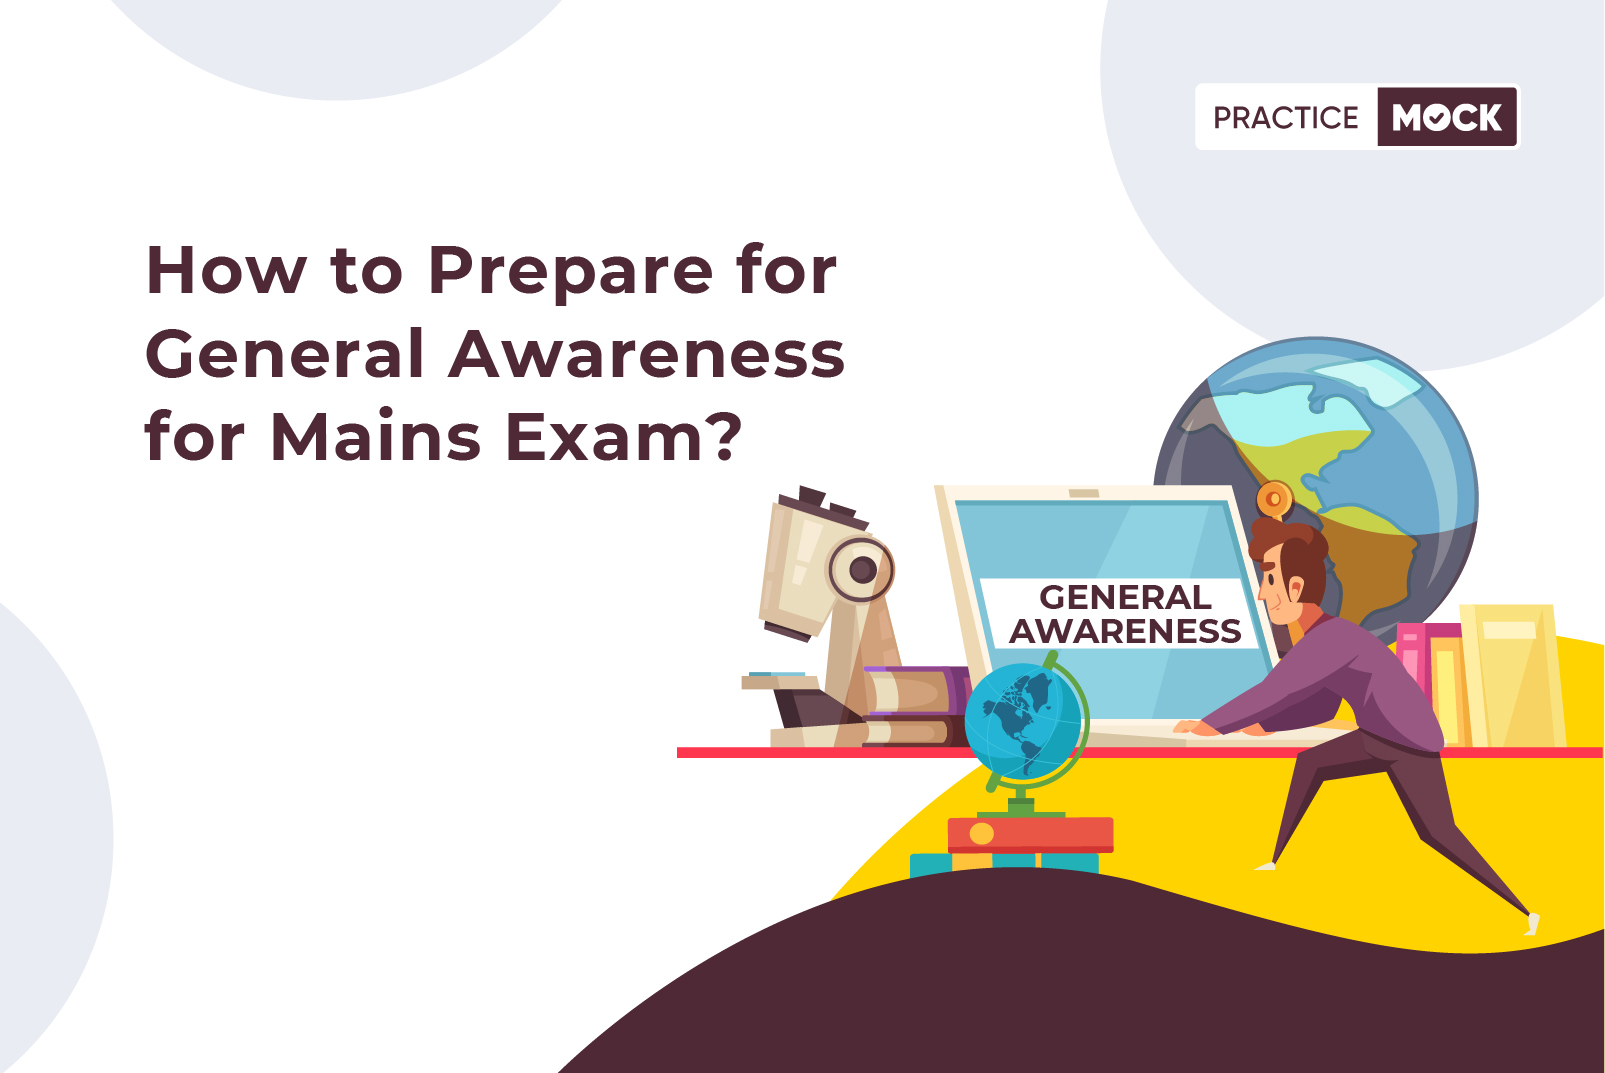 How to Prepare for General Awareness for Mains Exam?